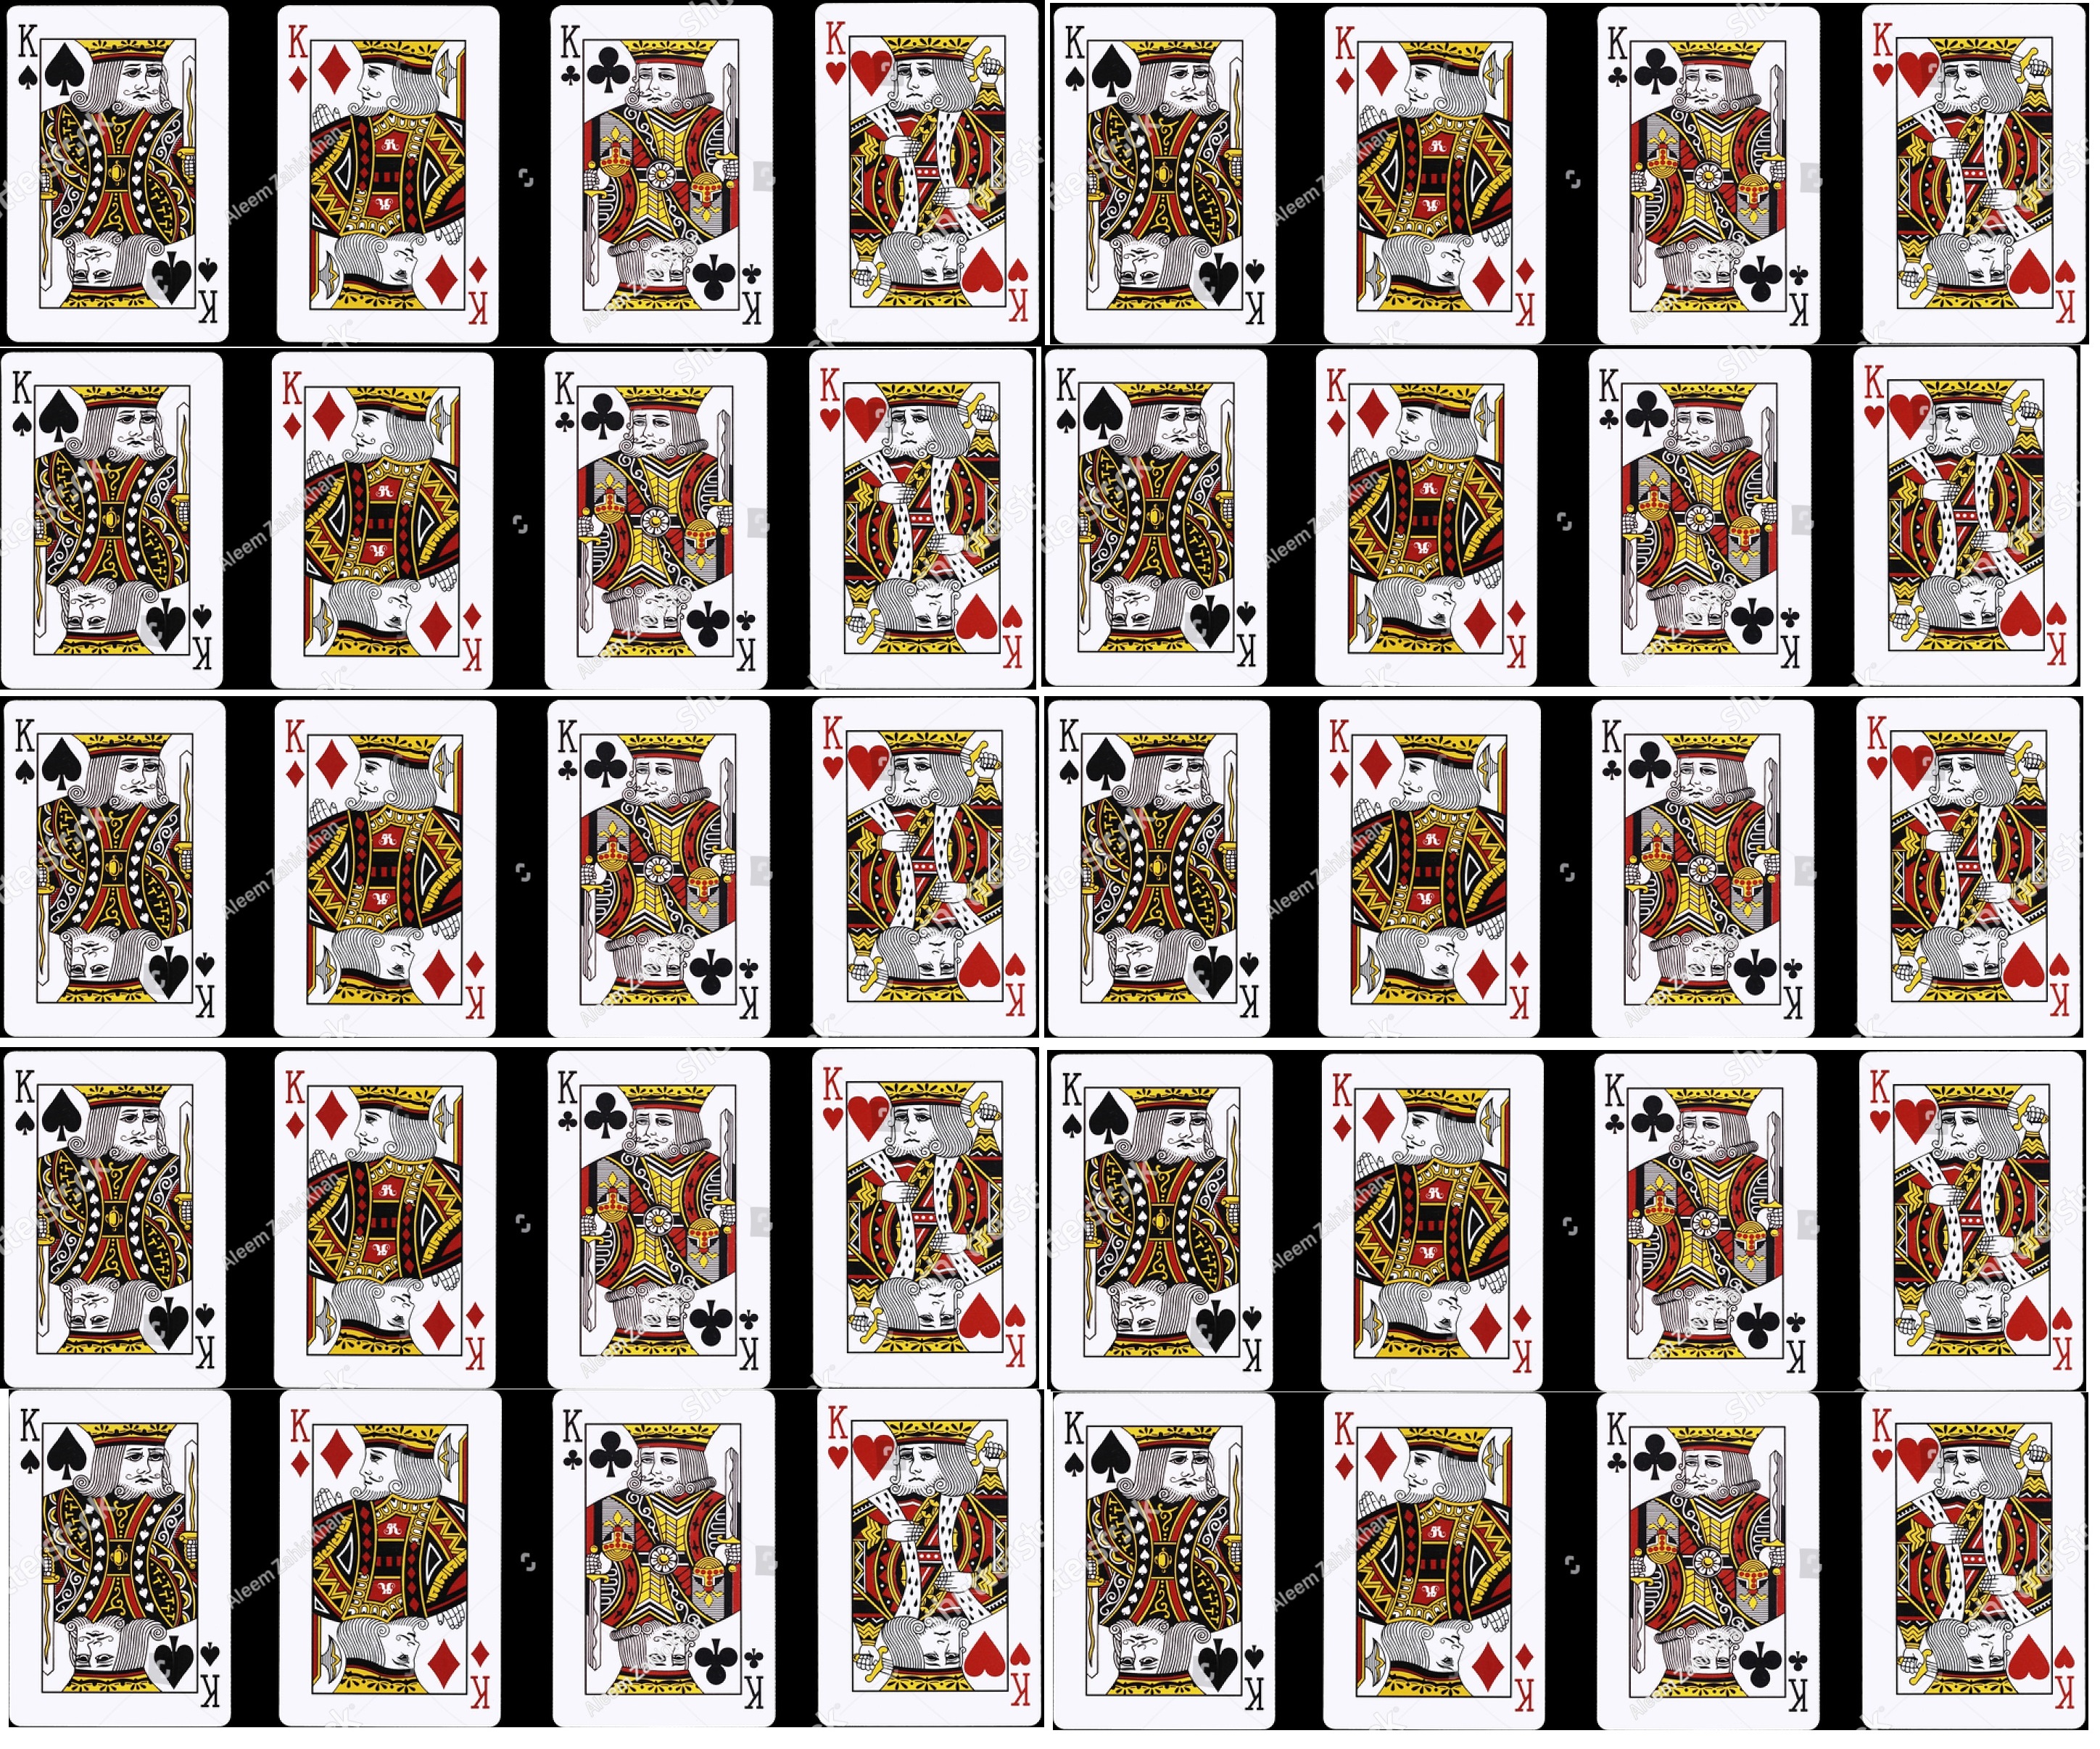 stock-photo--kings-in-a-row-playing-cards-isolated-on-black-588871316.jpg